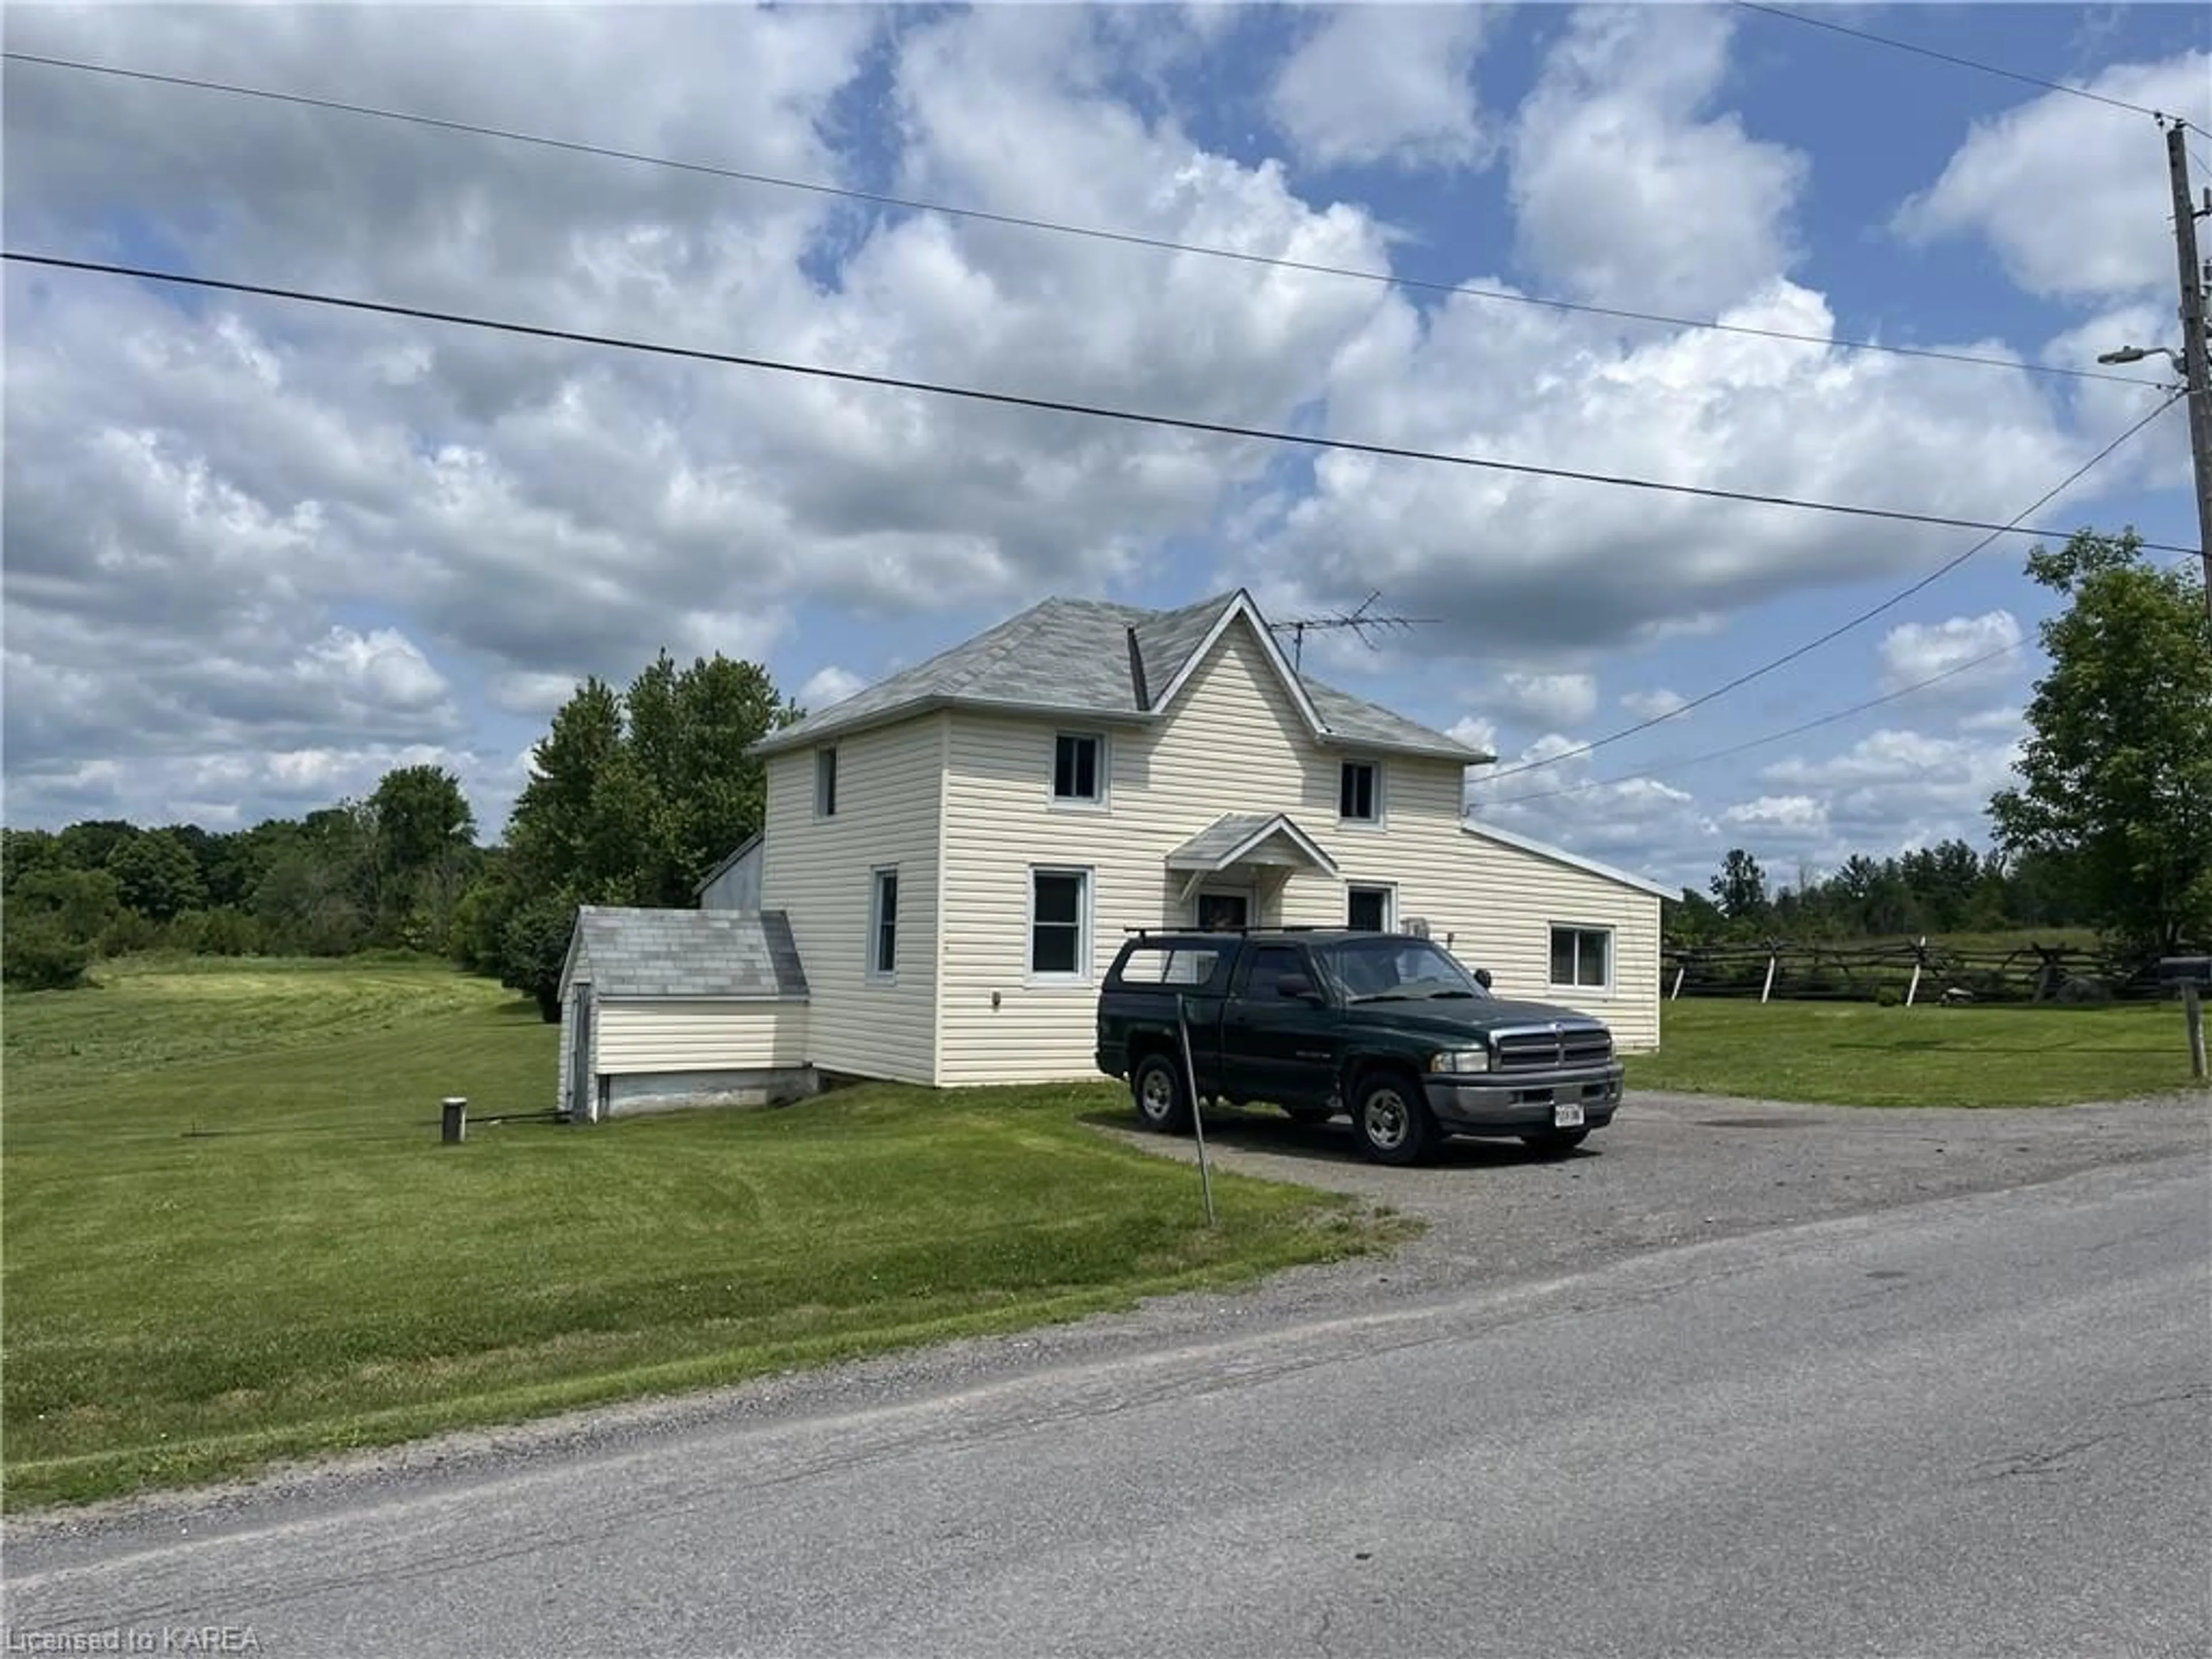 Home with unknown exterior material for 747 Westplain Rd, Greater Napanee Ontario K0K 2K0